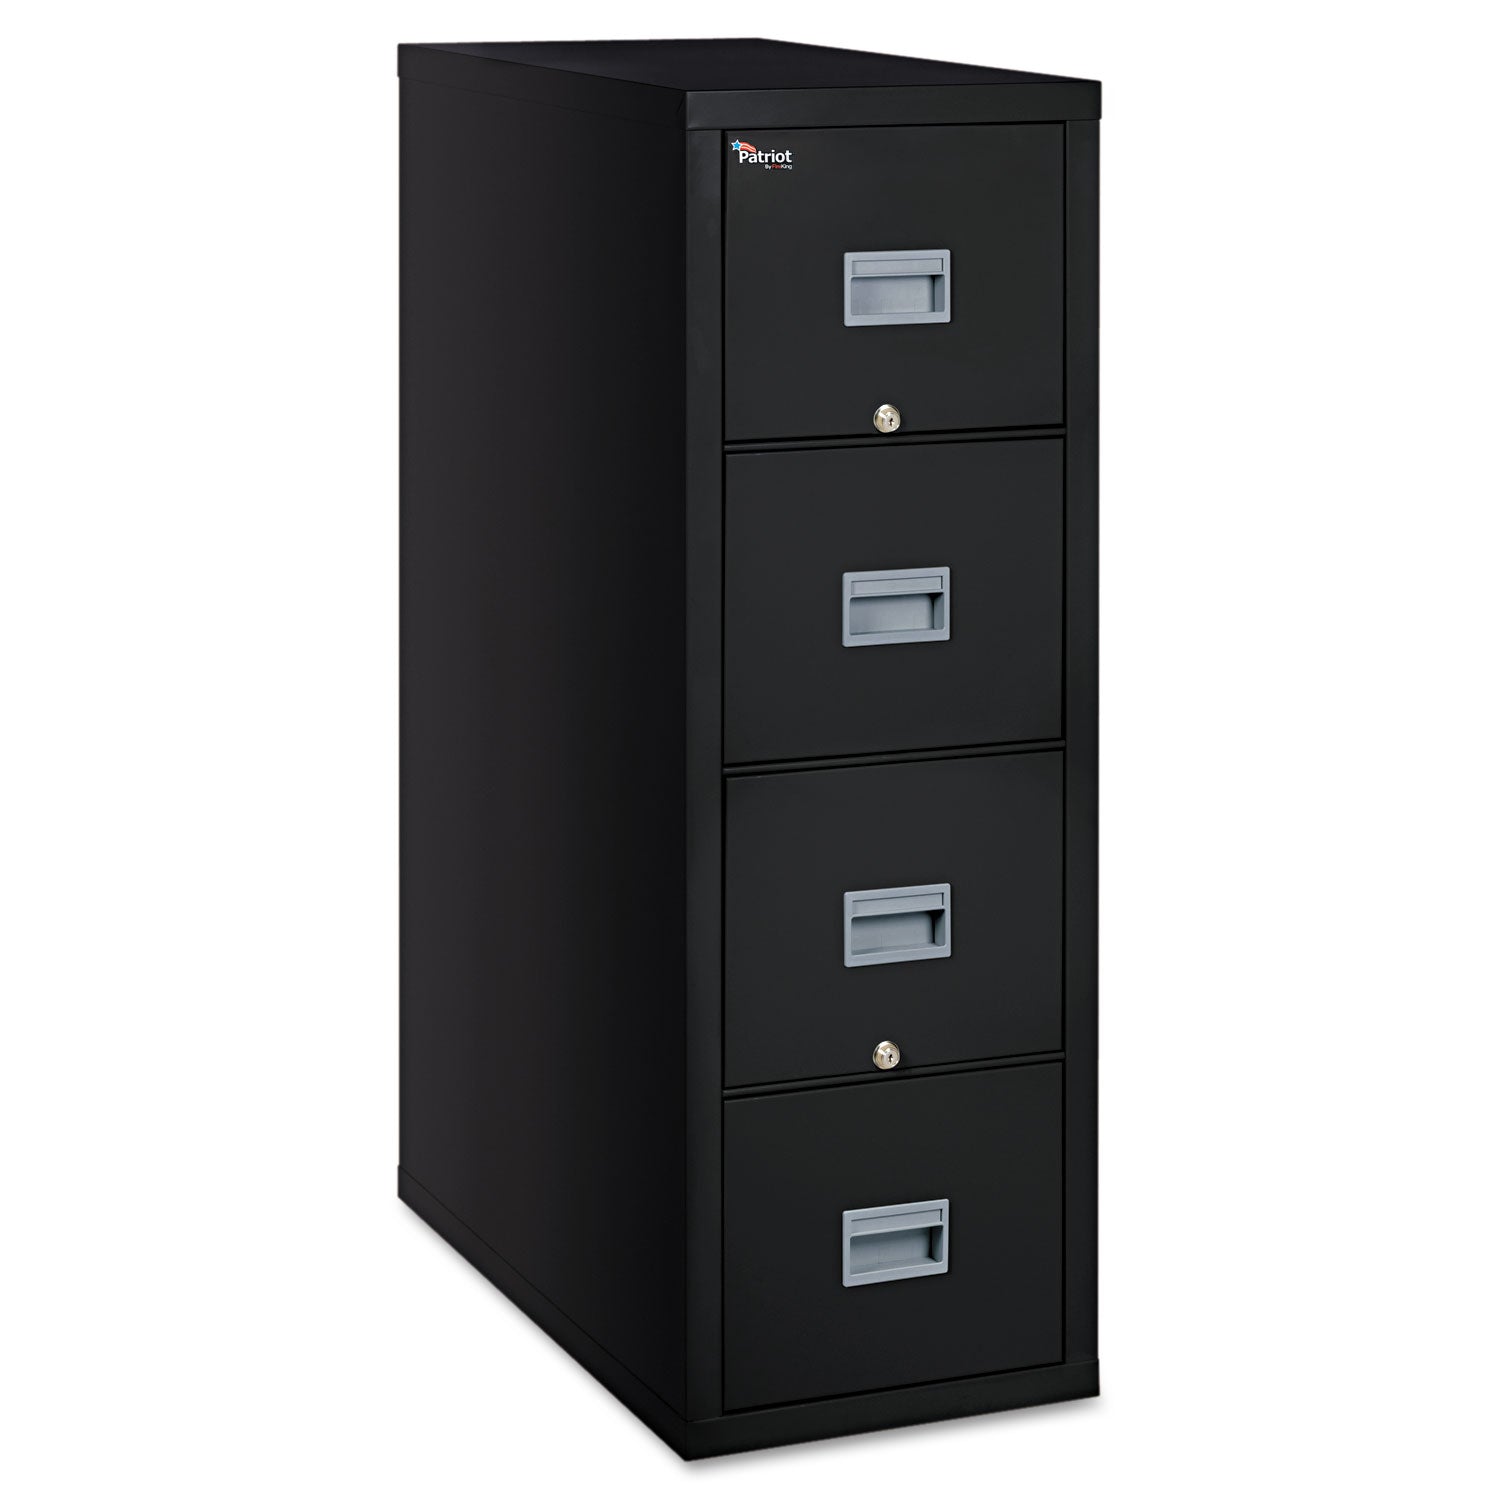 Patriot by FireKing Insulated Fire File, 1-Hour Fire Protection, 4 Legal-Size File Drawers, Black, 20.75" x 31.63" x 52.75 - 